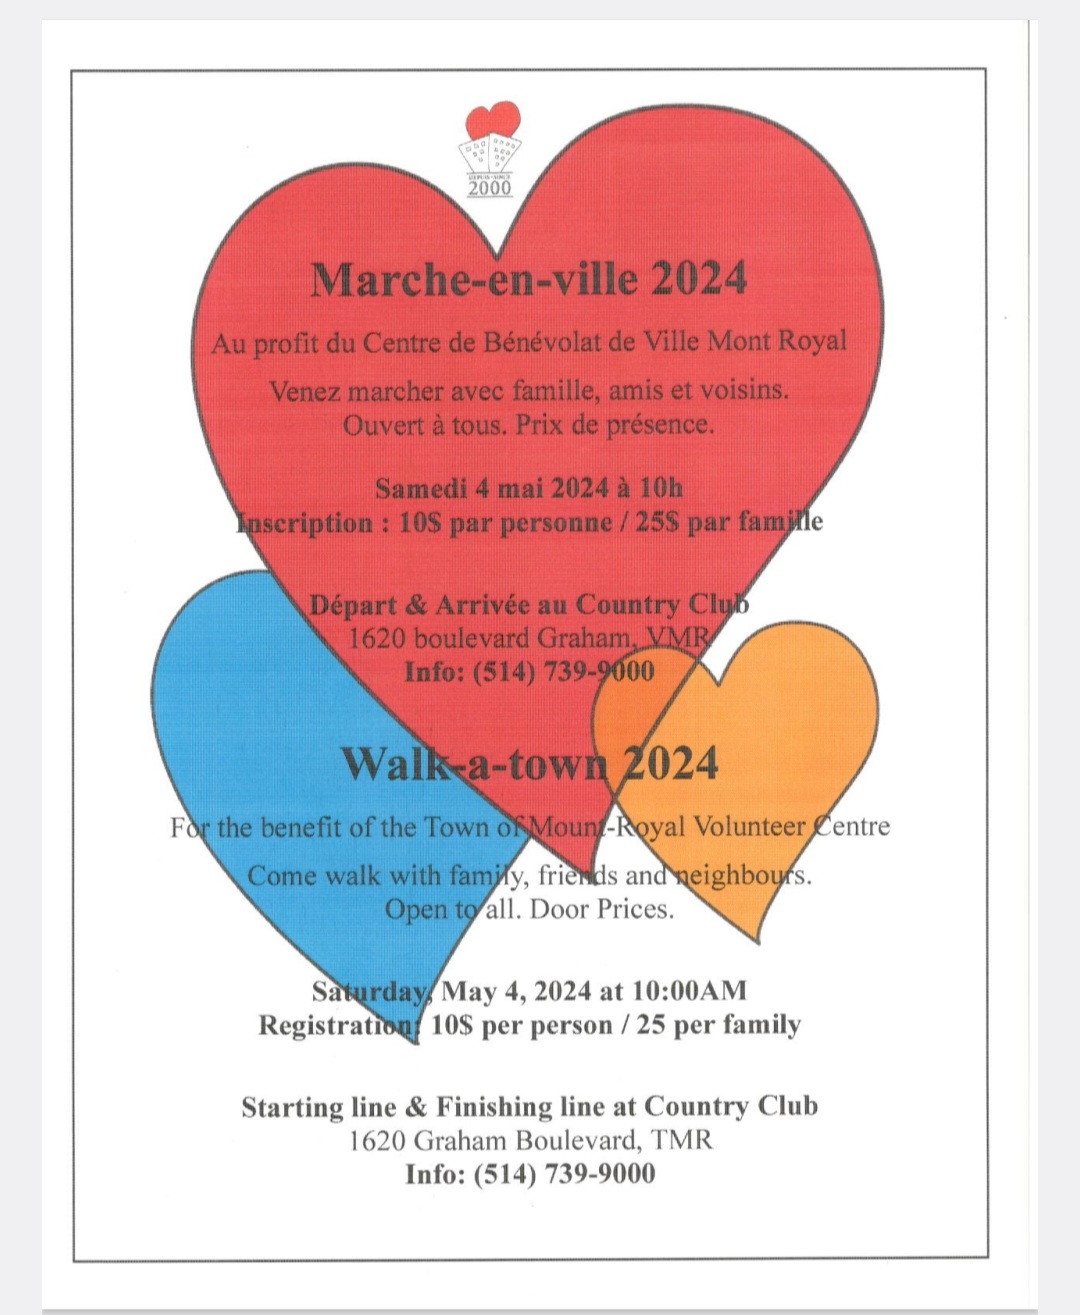 Town of Mount Royal Volunteer Center Walk-A-Town, Saturday May 4th 2024 - image